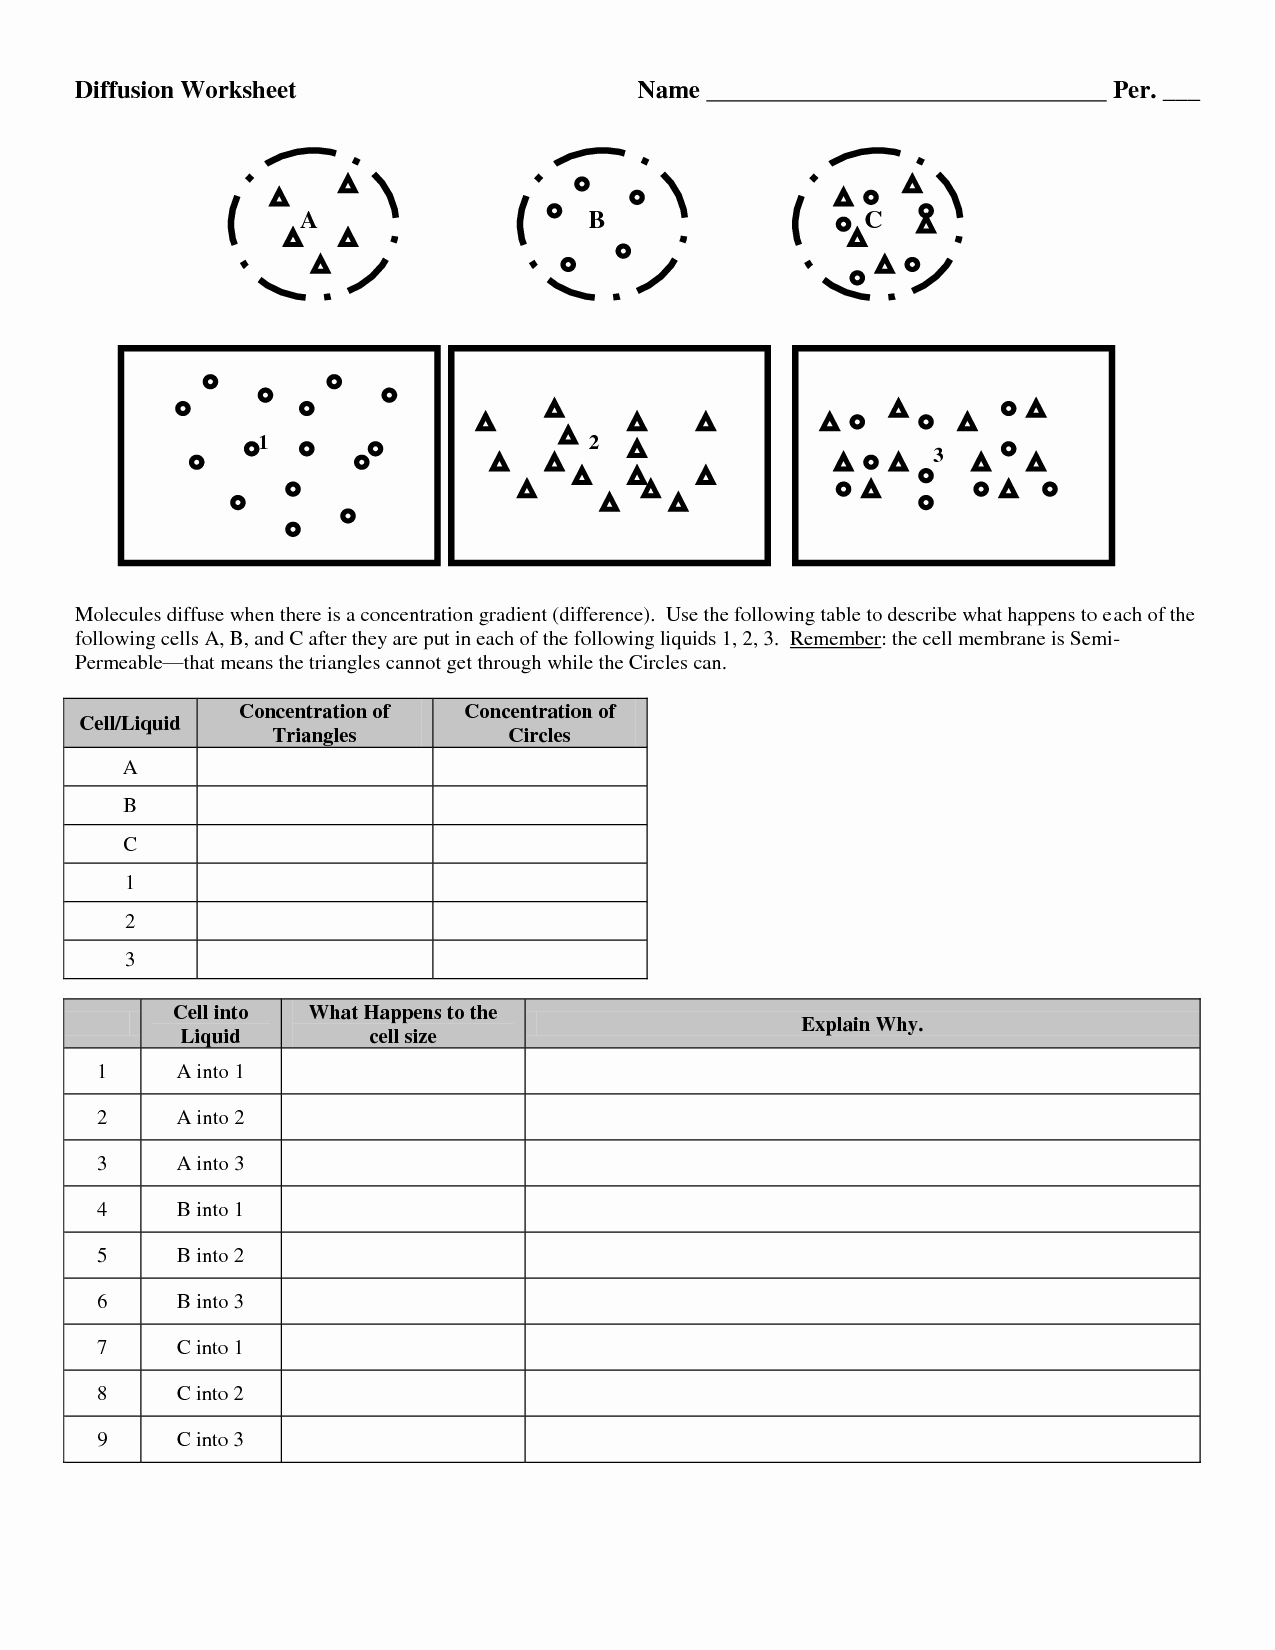 Diffusion and Osmosis Worksheet Fresh 16 Best Of Diffusion Osmosis Active Transport